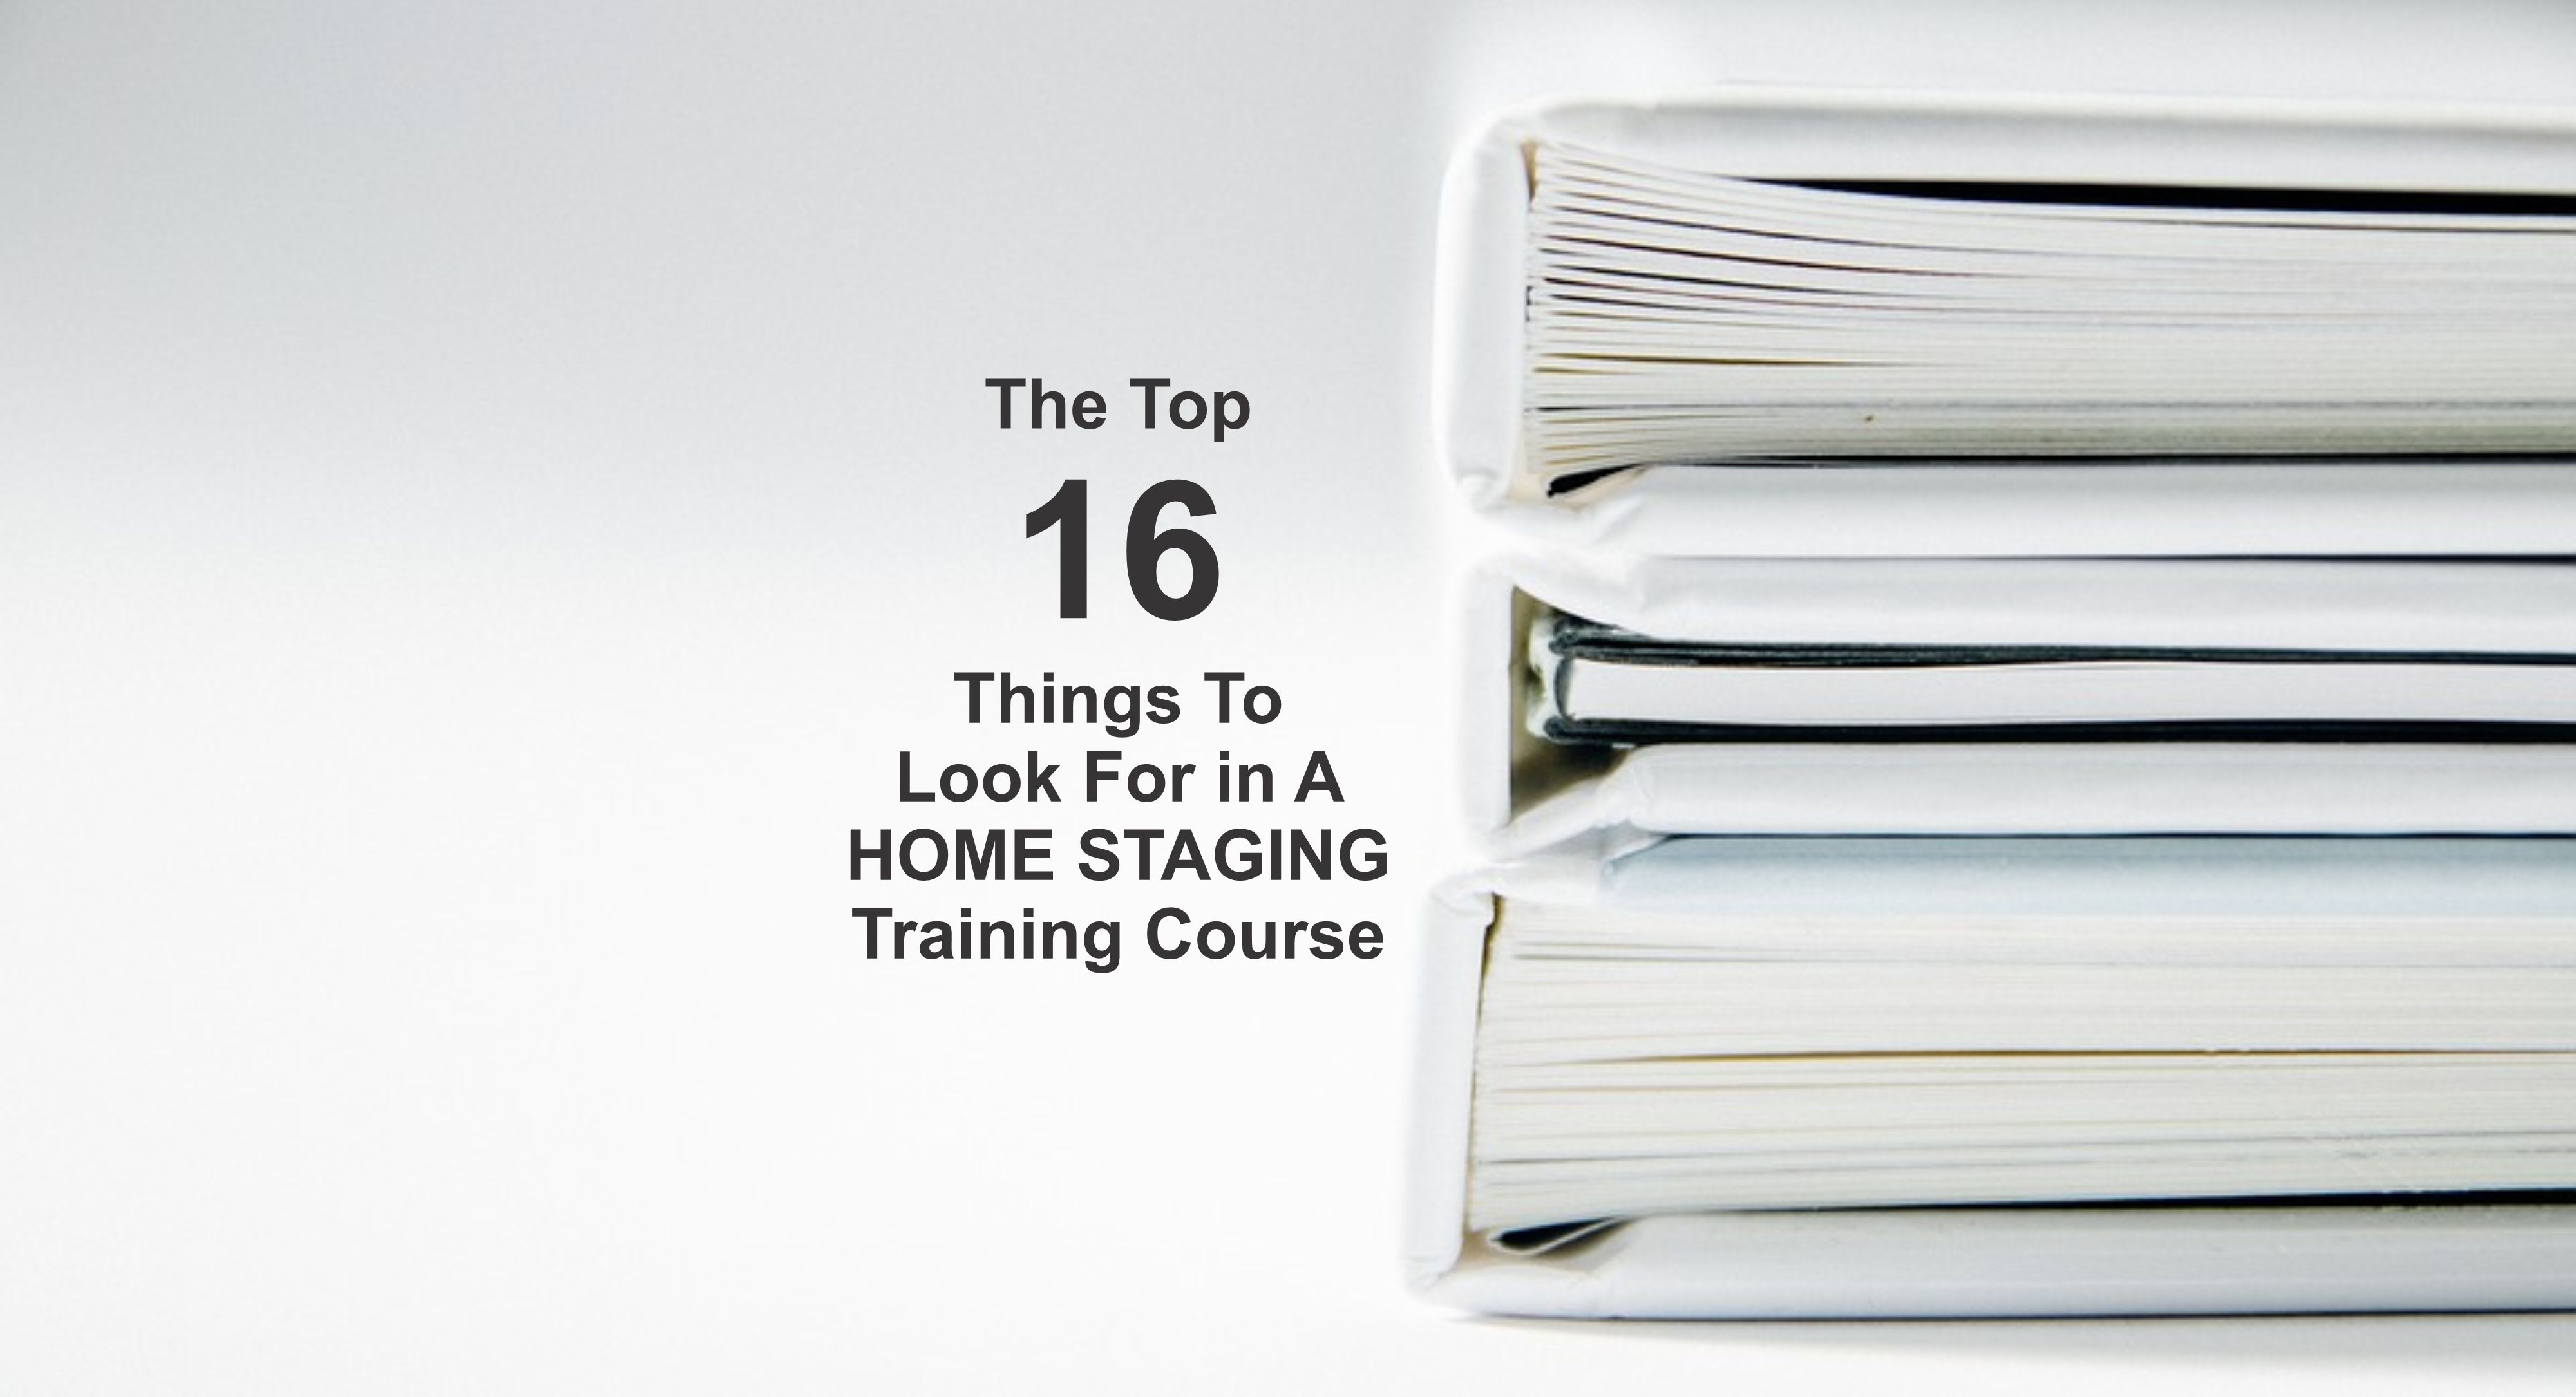 Is Starting a Home Staging Business A Good Idea?